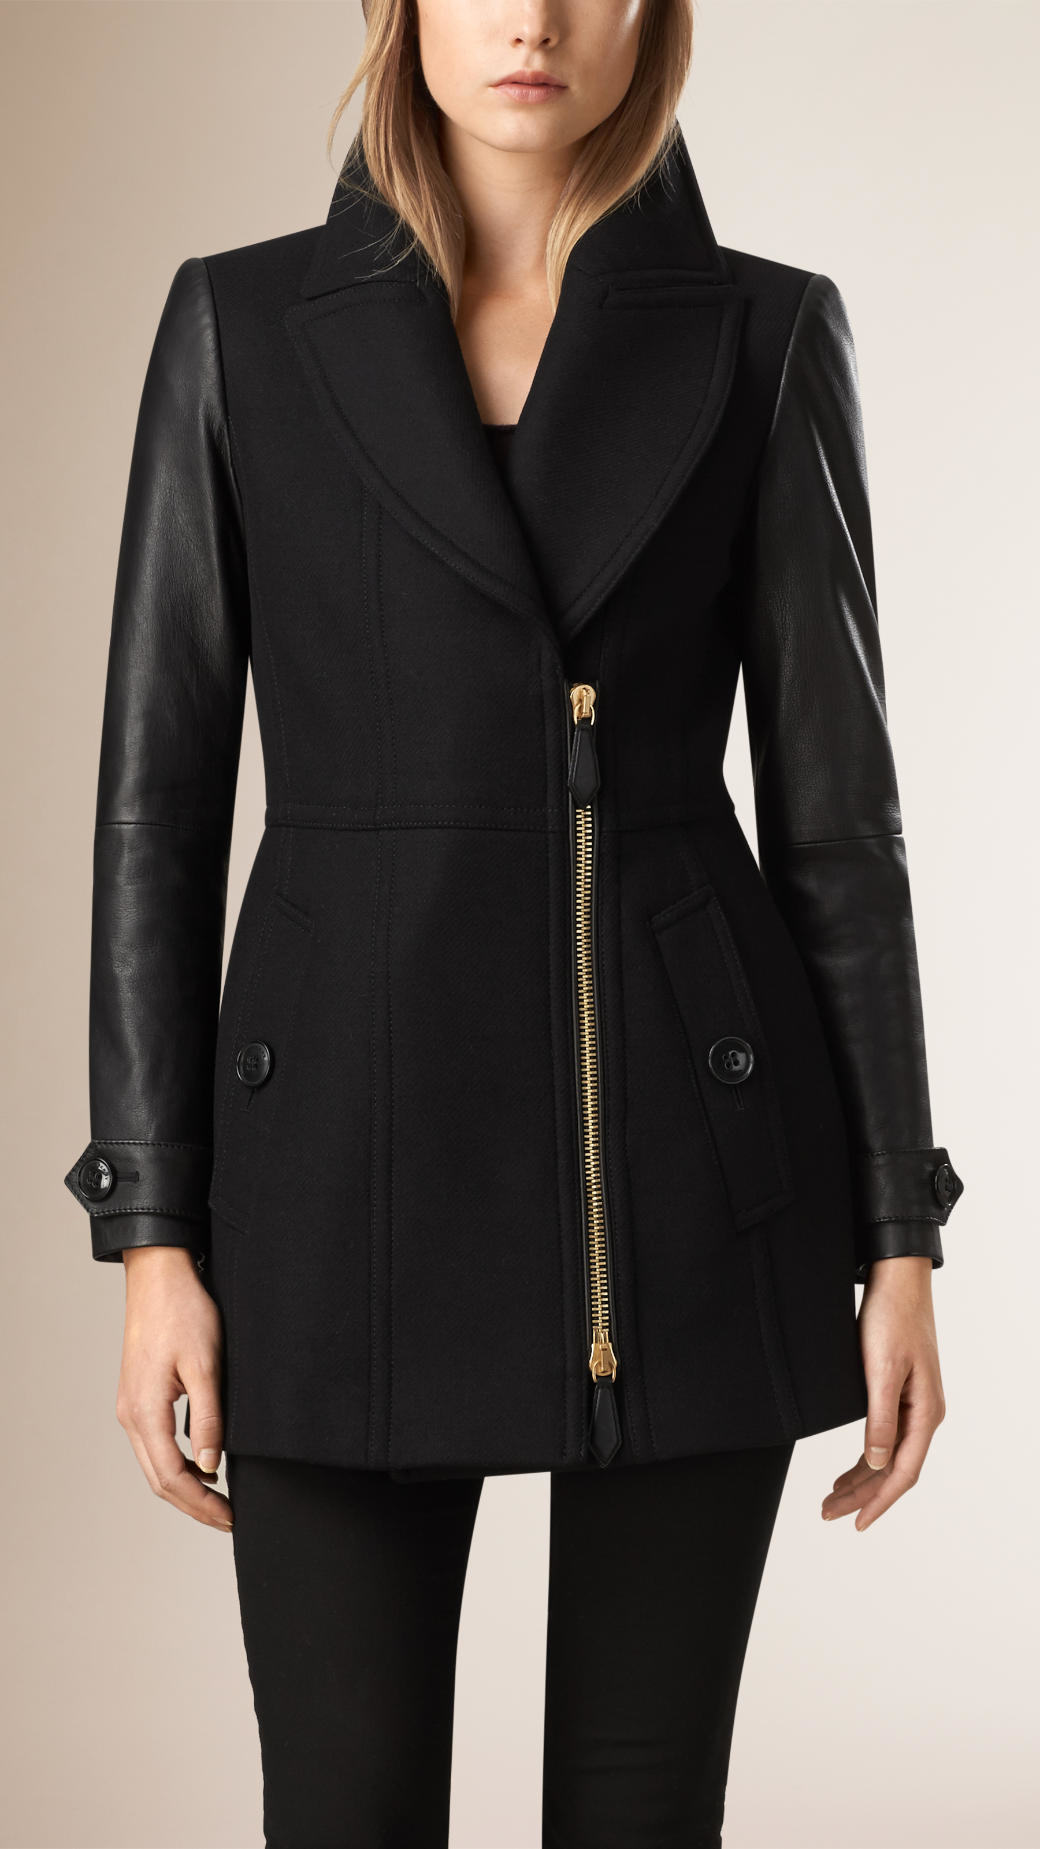 Lyst - Burberry Wool Cashmere Pea Coat With Lambskin Sleeves in Black